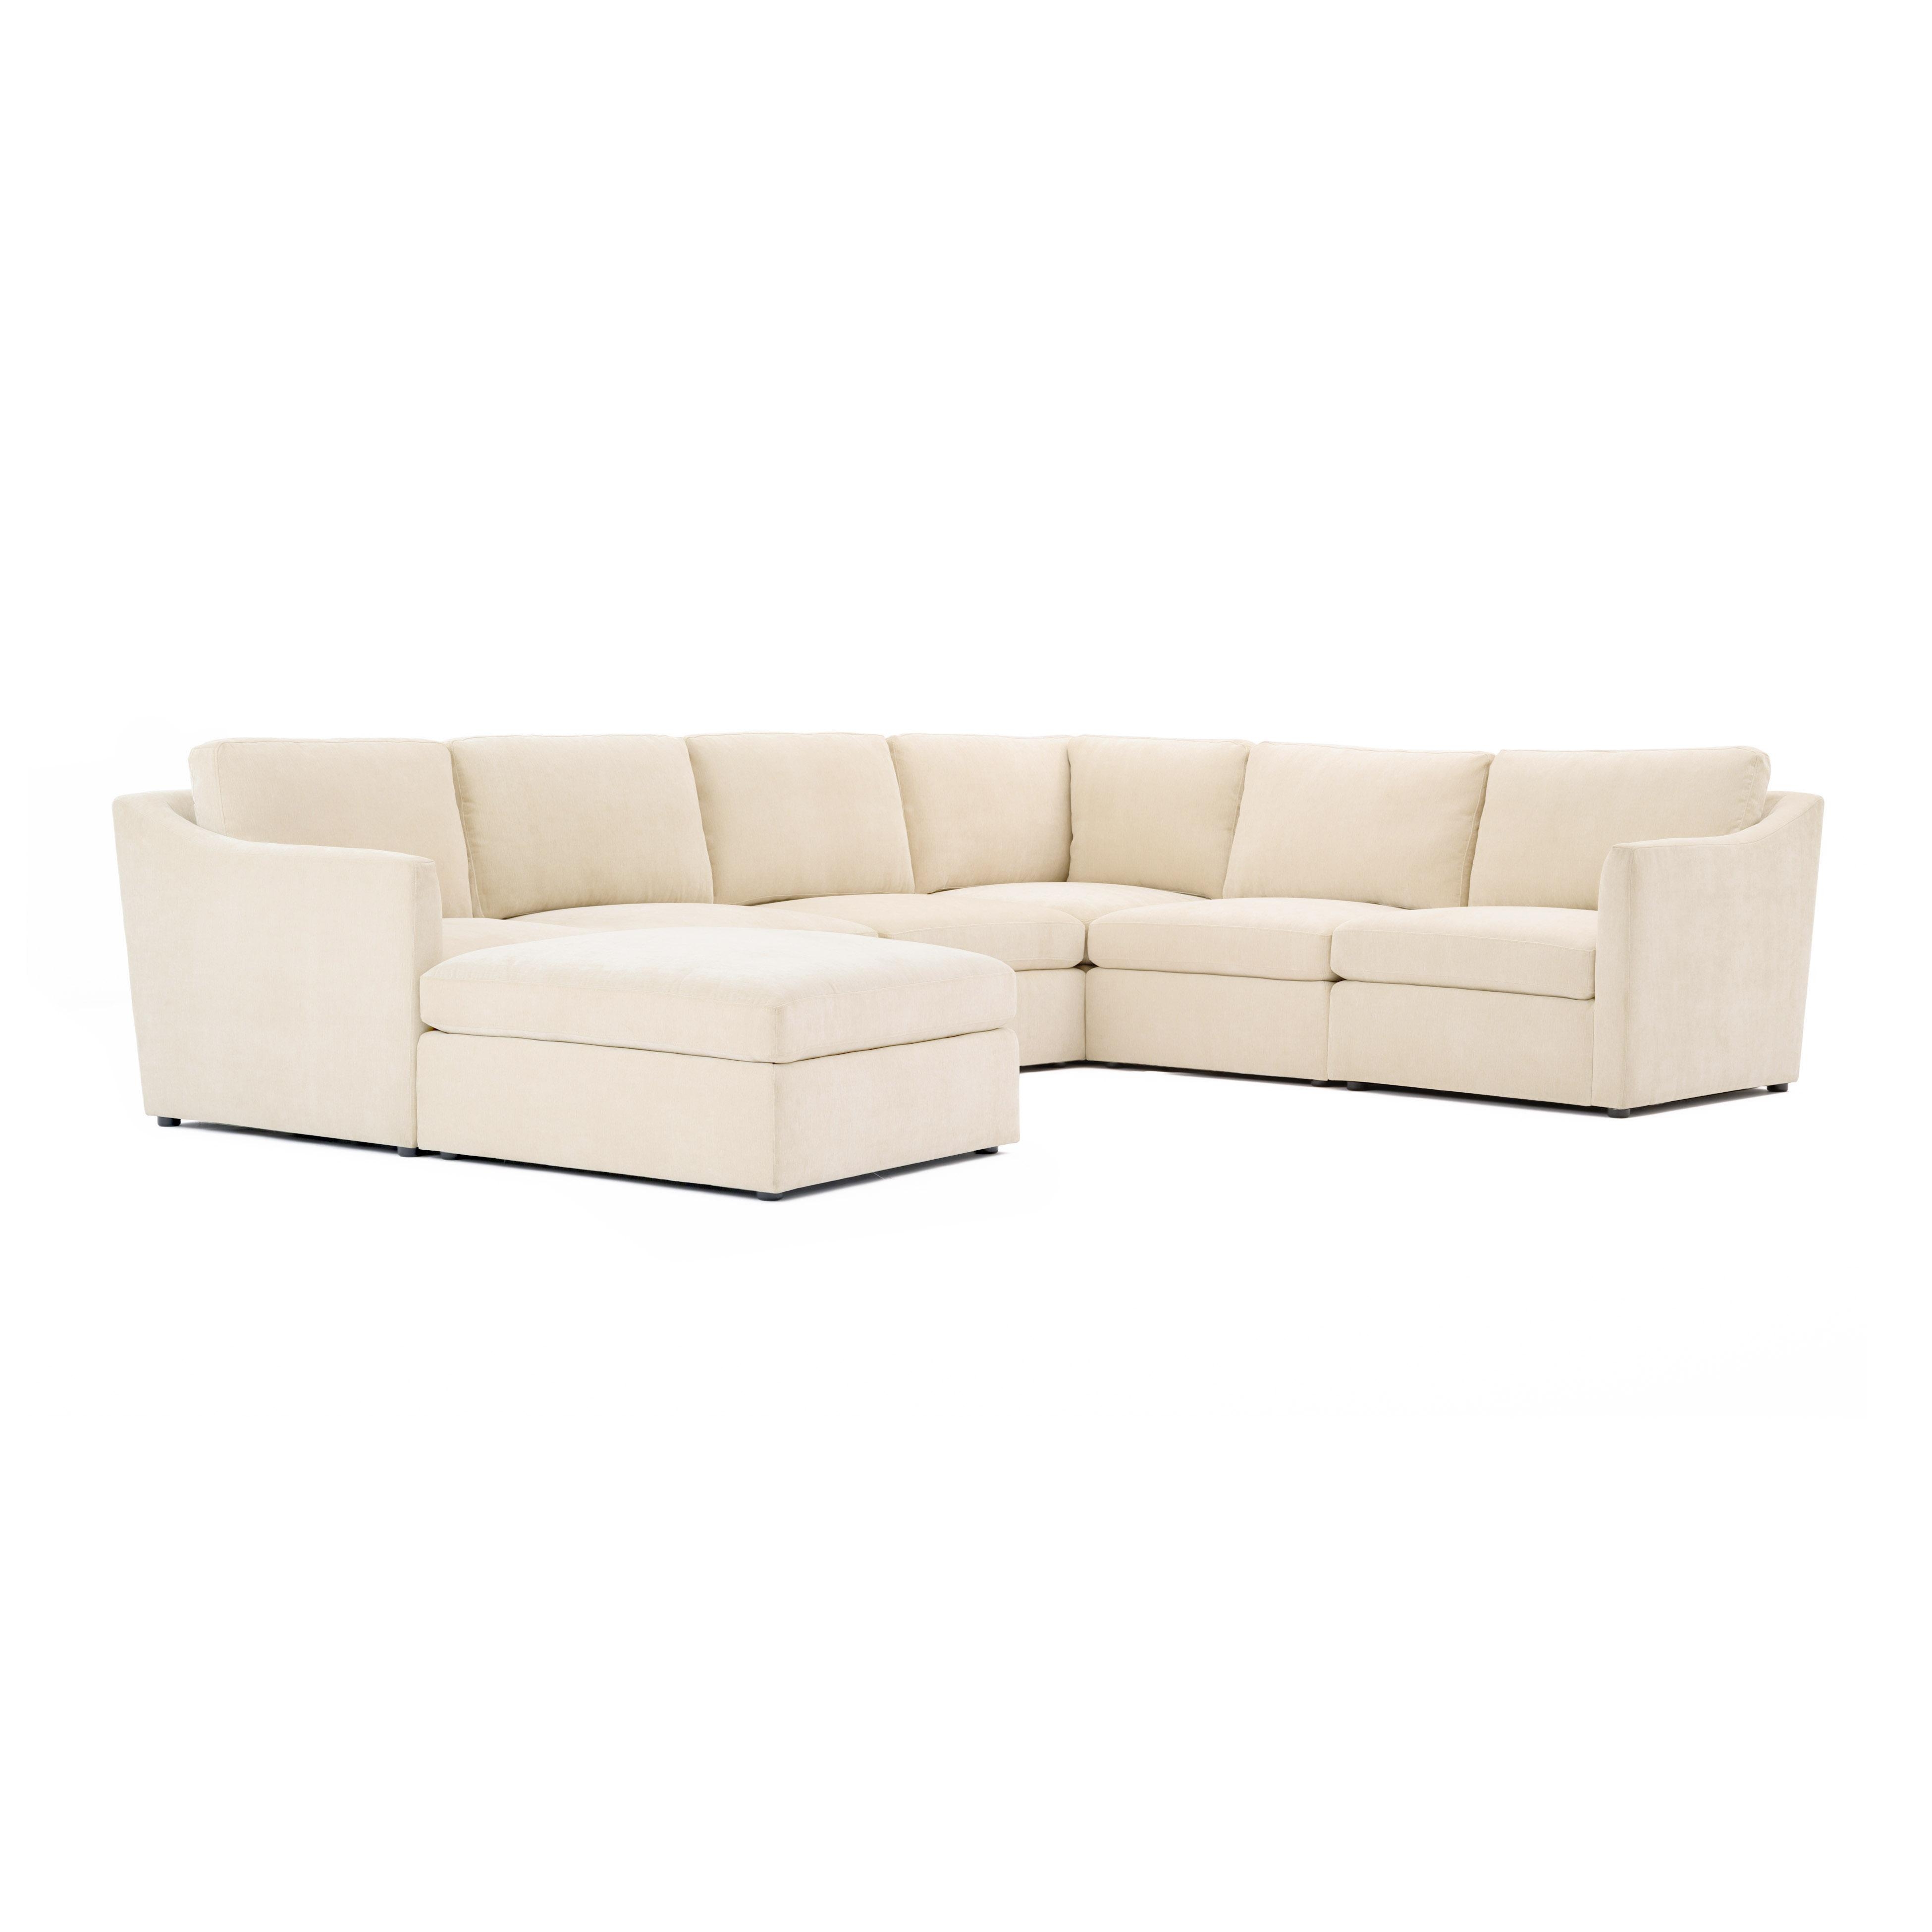 Aiden Beige Modular Large Chaise Sectional - Image 0